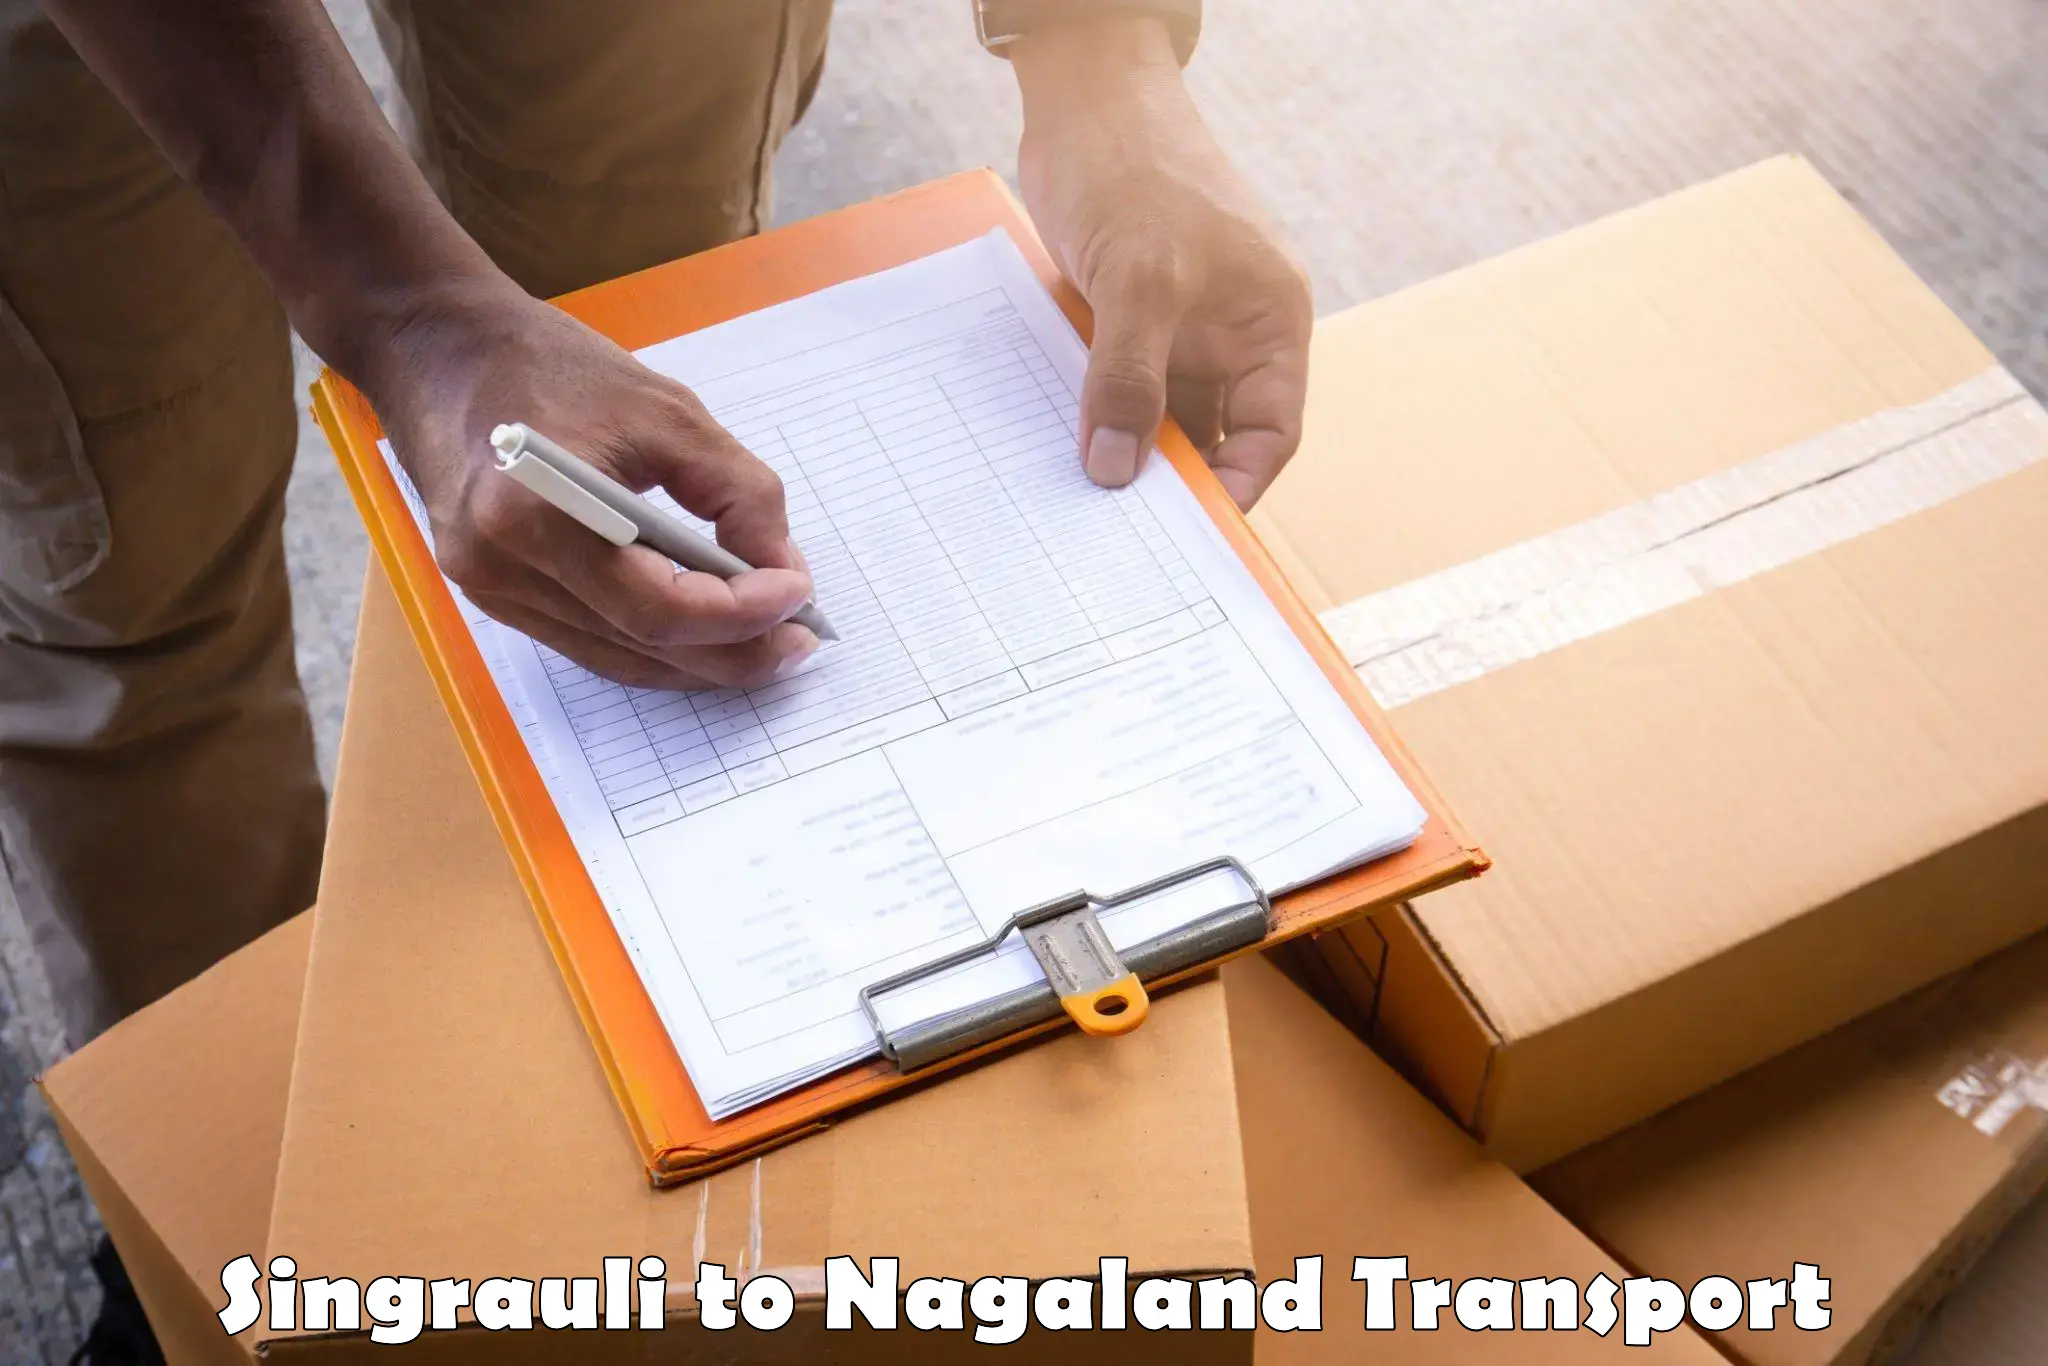 Commercial transport service Singrauli to NIT Nagaland